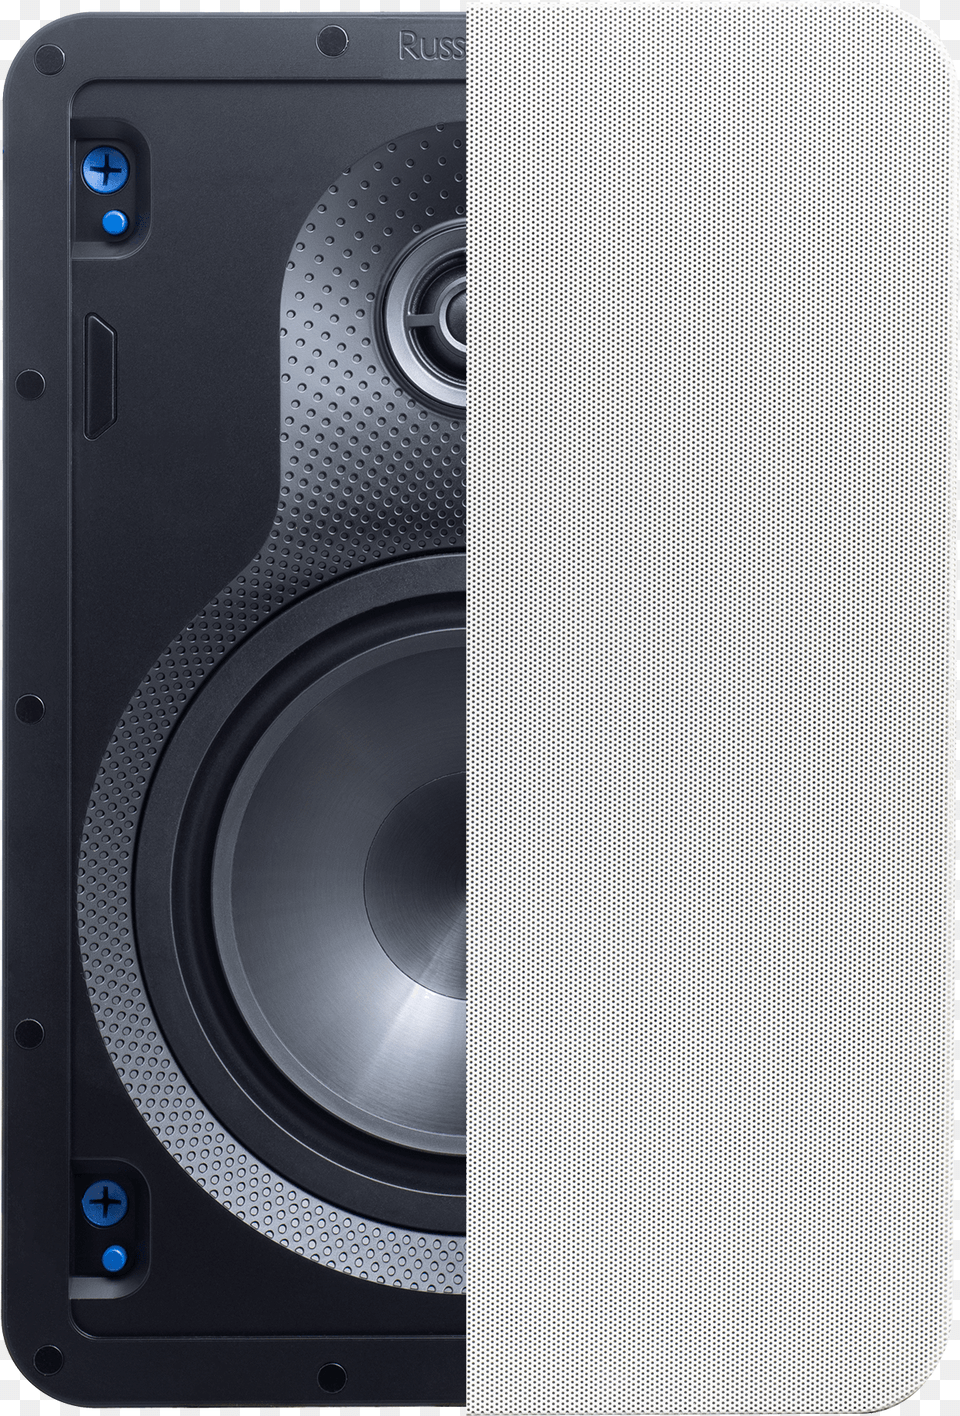 Iw 620 Front W Grille Subwoofer, Electronics, Speaker Png